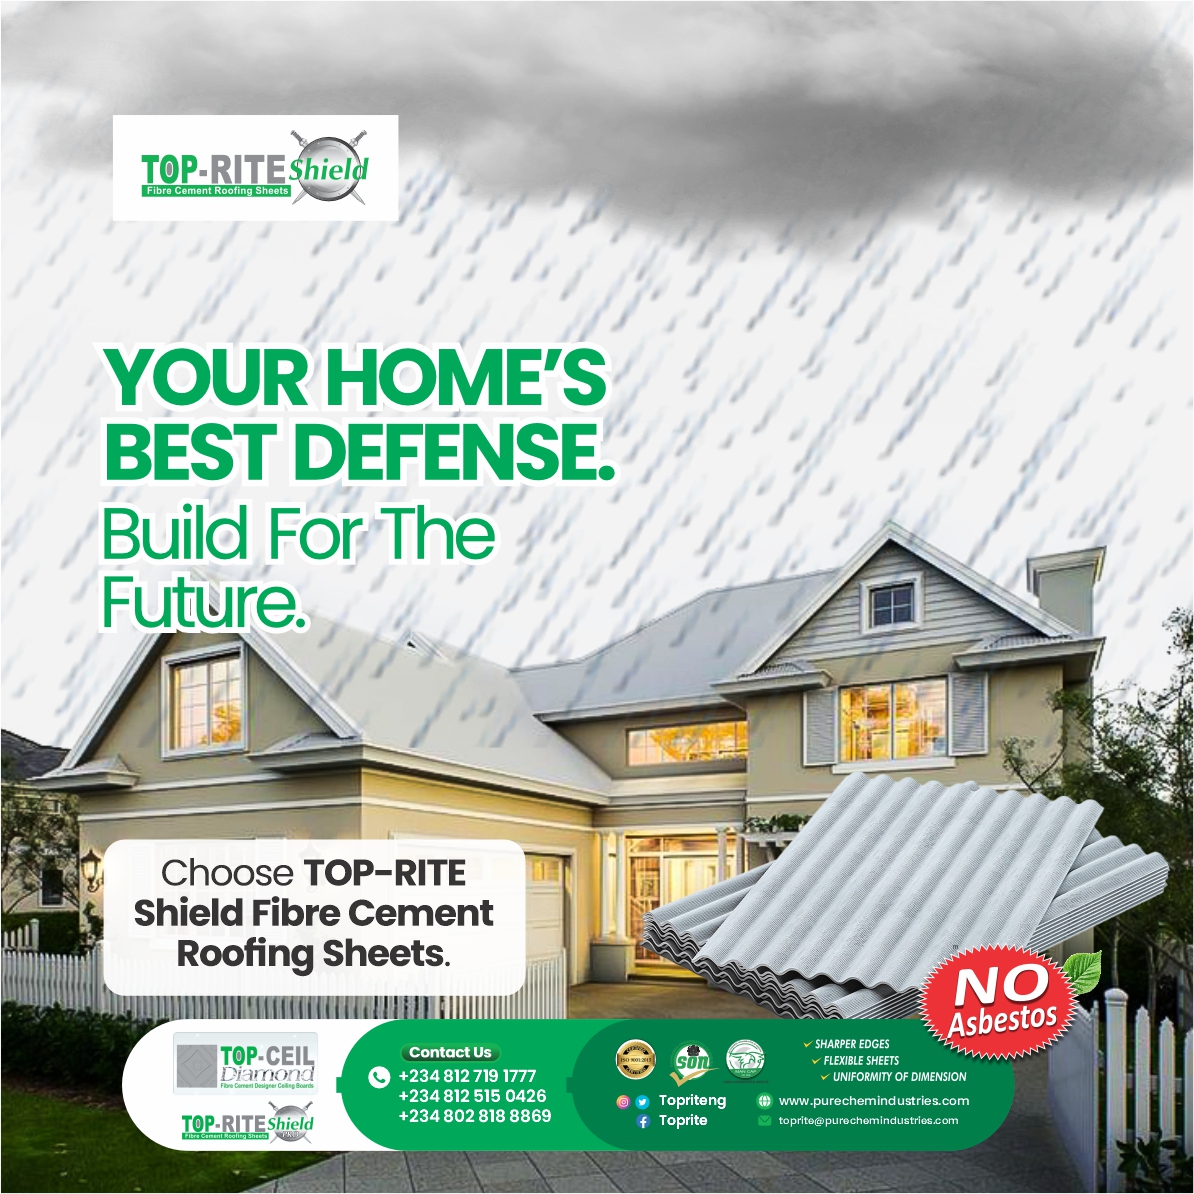 Secure tomorrow with TOP-RITE Shield Fibre Cement Roofing Sheets—your home’s best defense against the elements.

#TOPRITERoofing #BuildForTheFuture #HomeDefense #DurableRoofing #SustainableLiving #ArchitecturalExcellence #ProtectYourHome #QualityMaterials #EcoFriendlyHomes